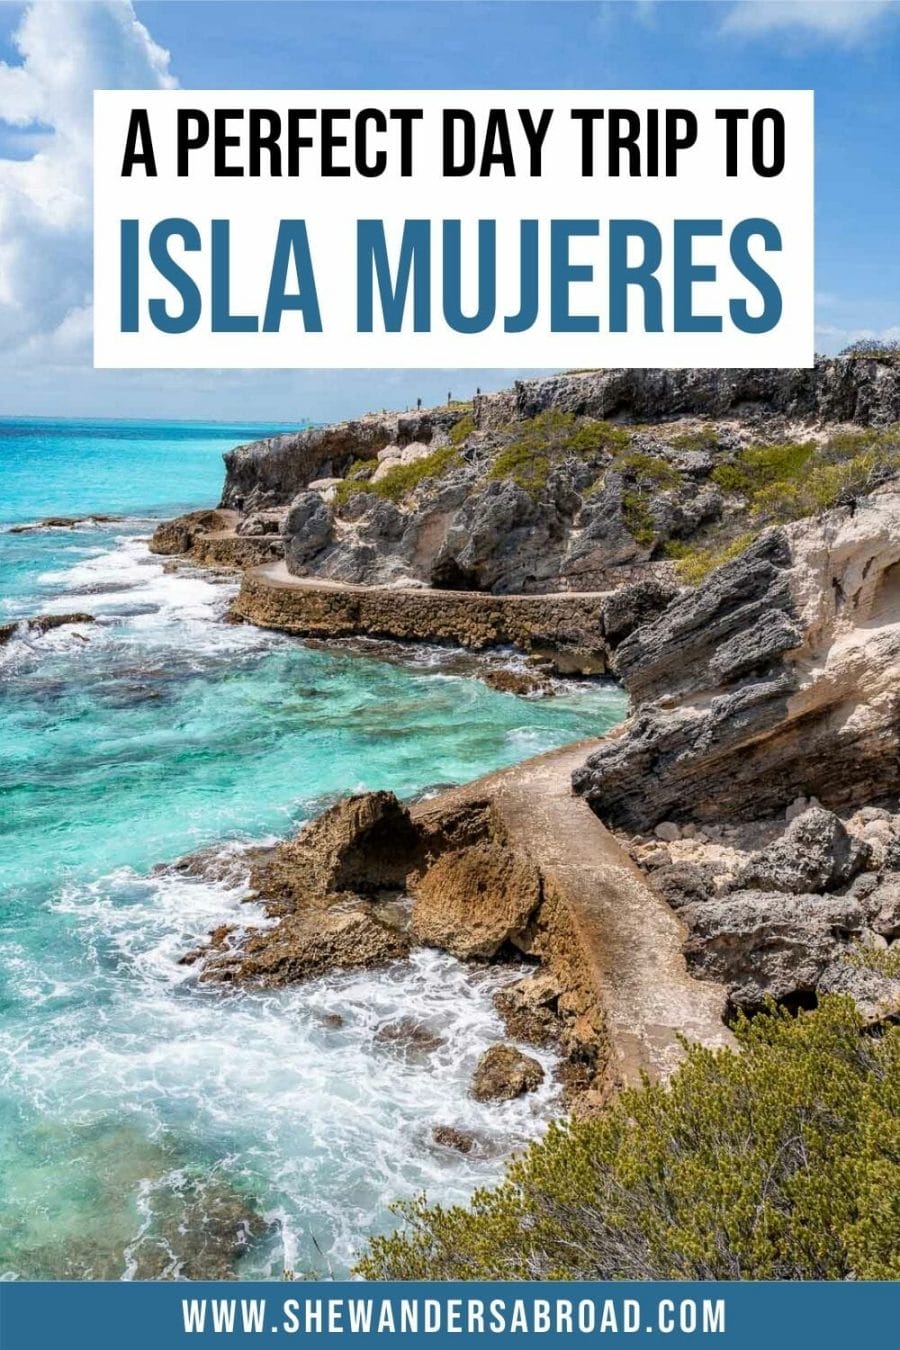 Day Trip to Isla Mujeres from Cancun: Everything You Need to Know